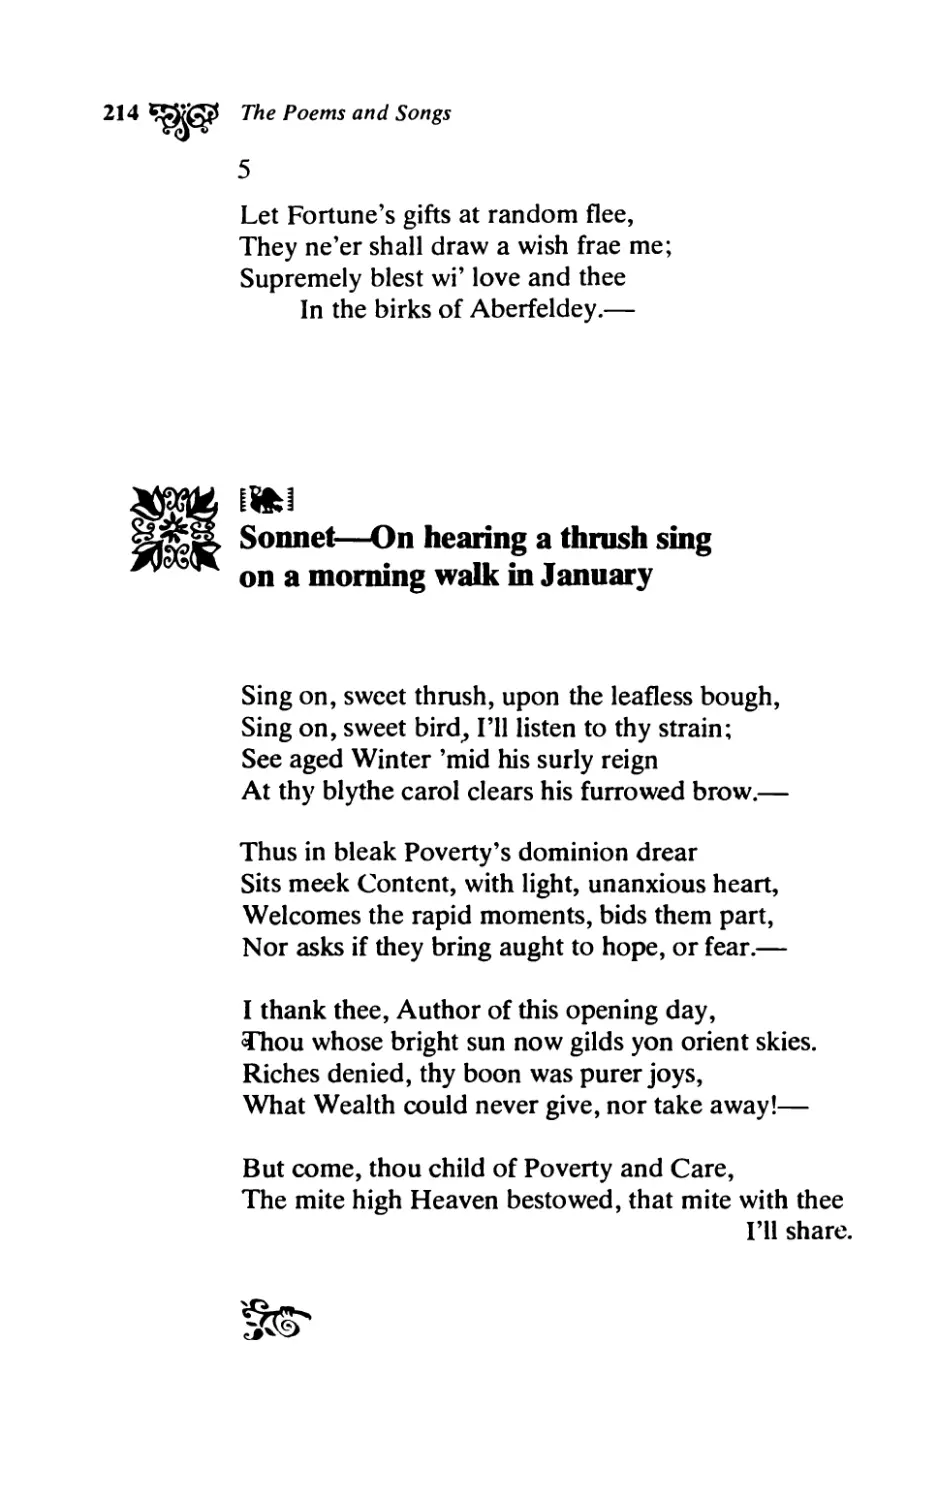 Sonnet - On hearing a thrush sing on a morning walk in January